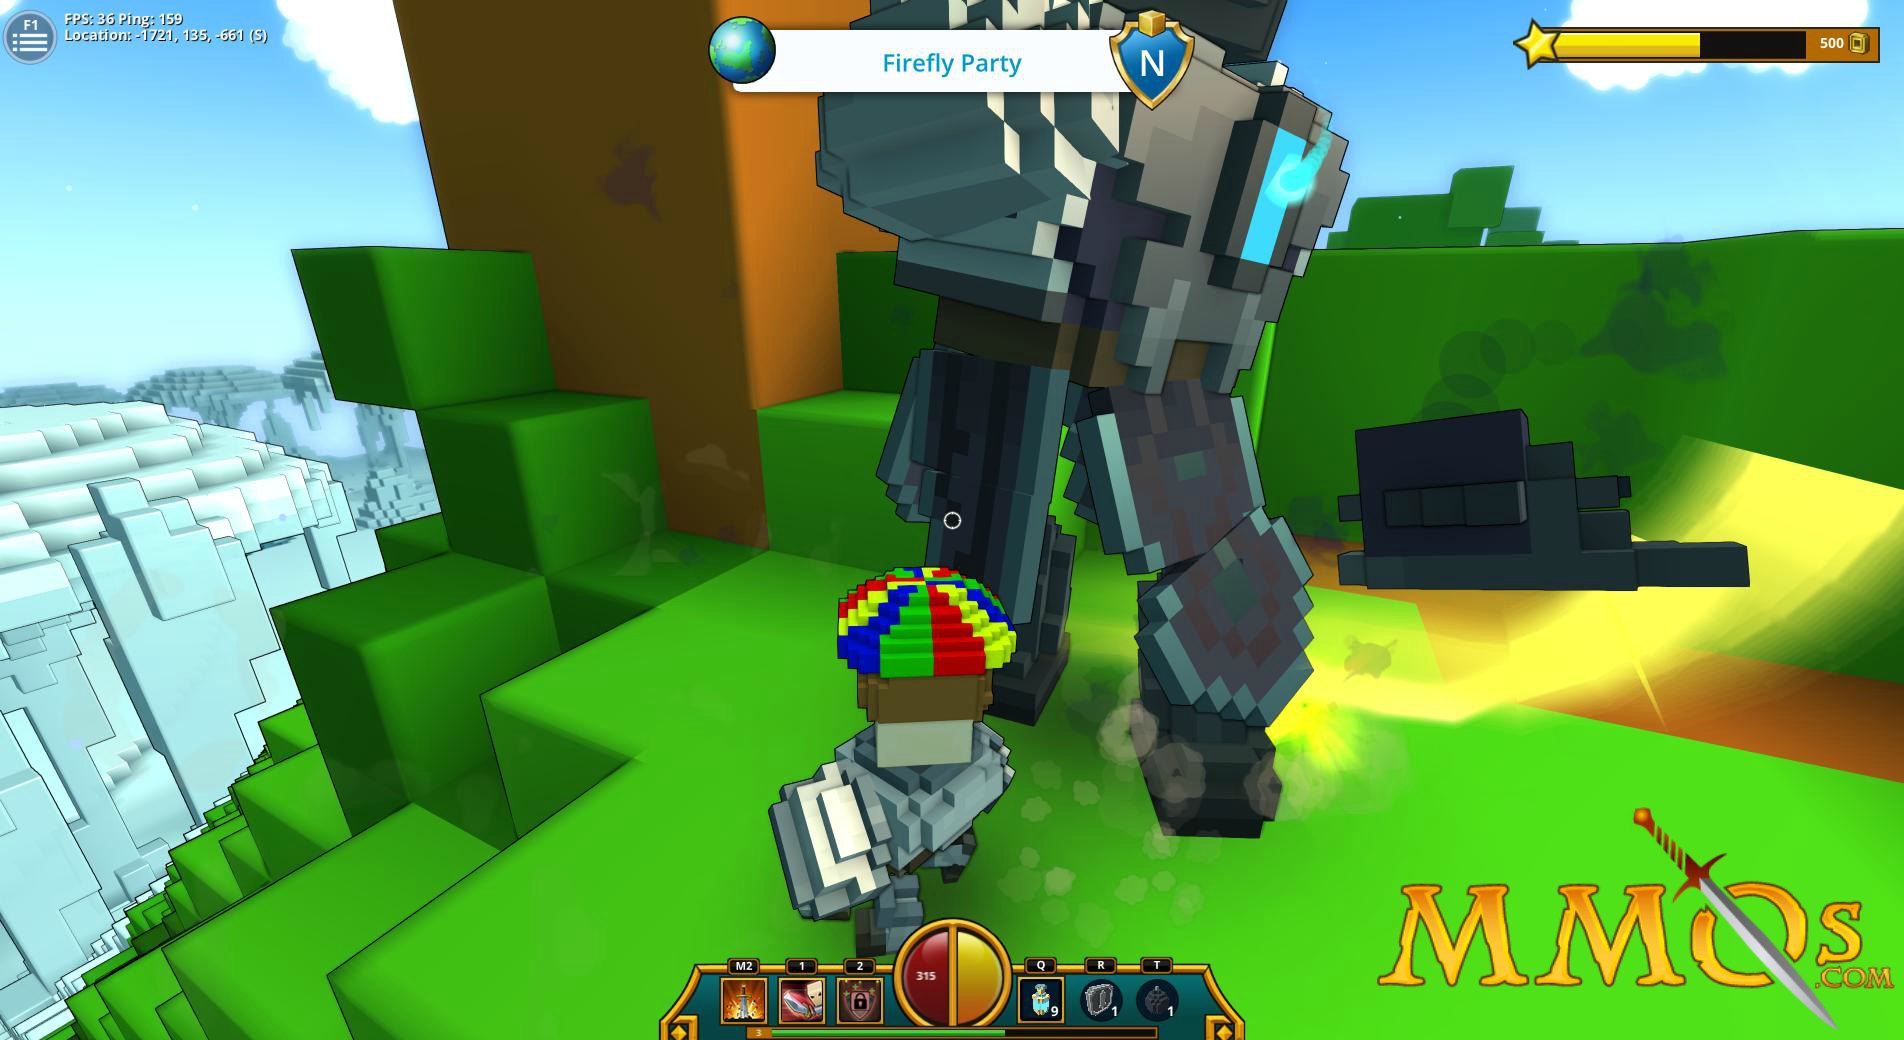 Trove  The exciting Voxel MMO Adventure